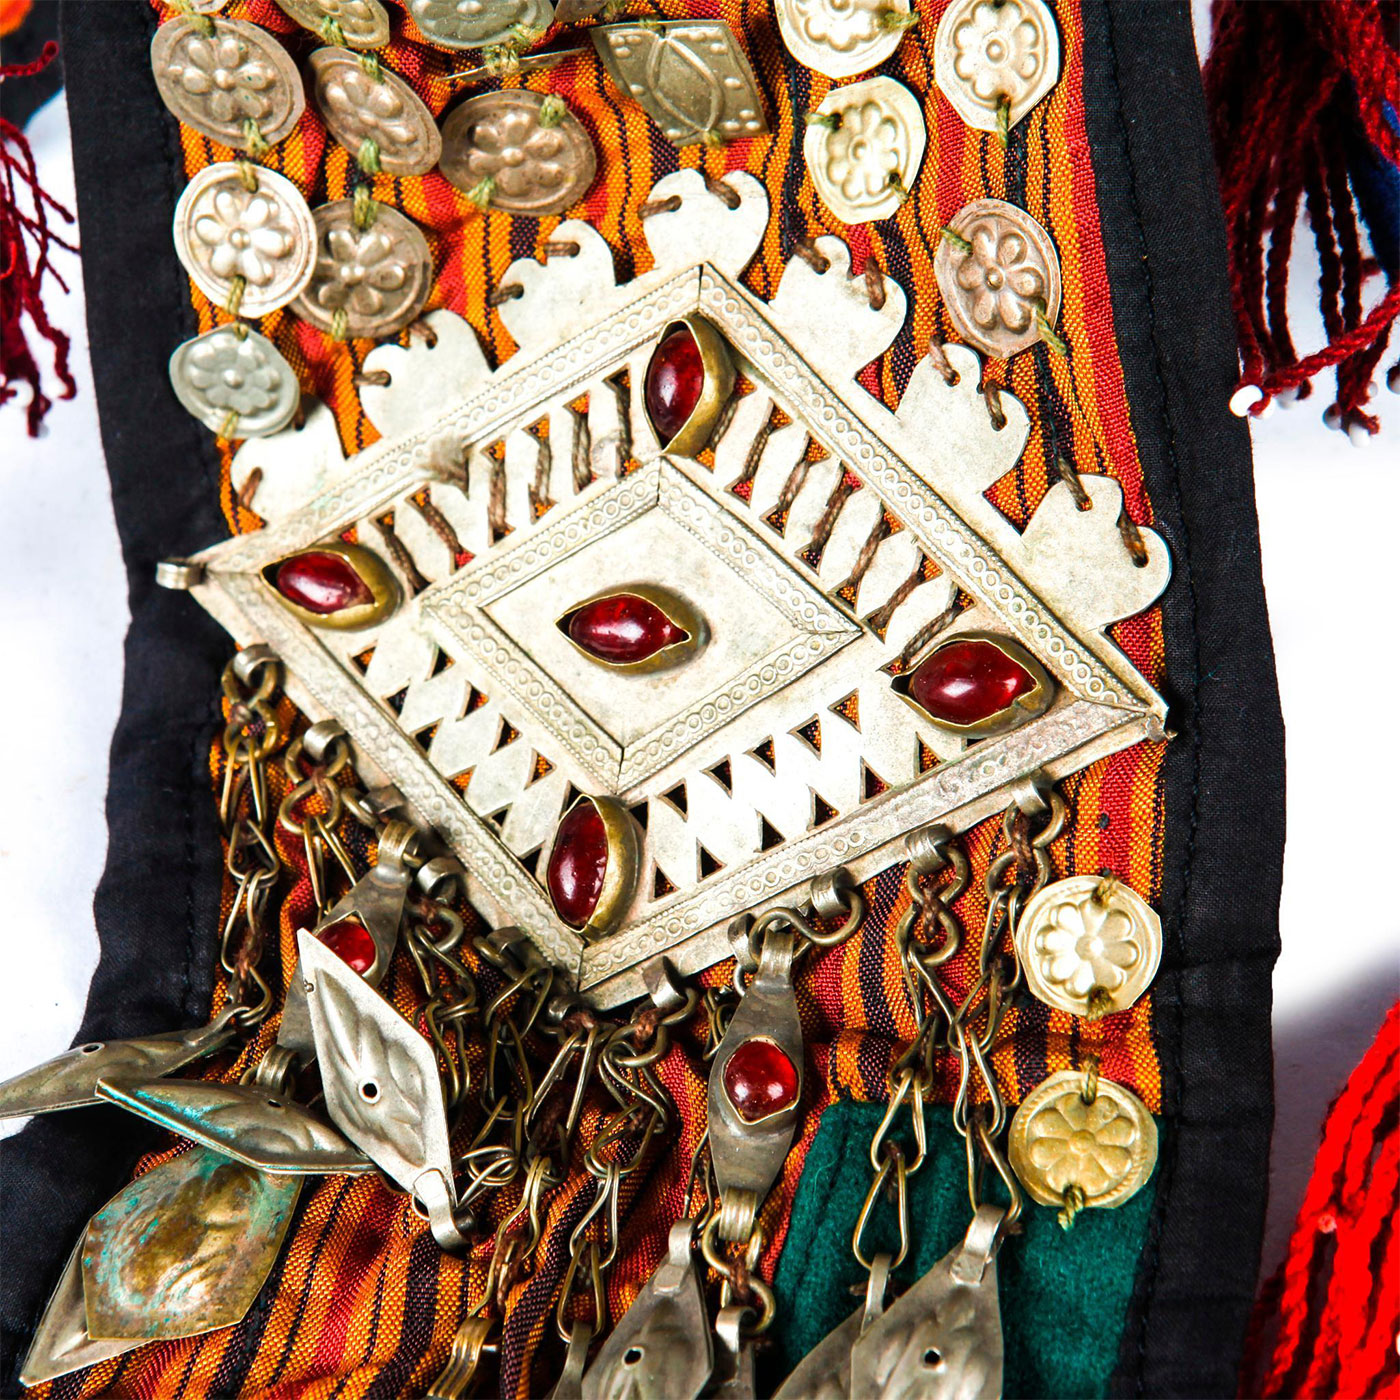 TURKMENISTANI ELABORATE HAND SEWN HEADDRESS WITH COINS - Image 6 of 8